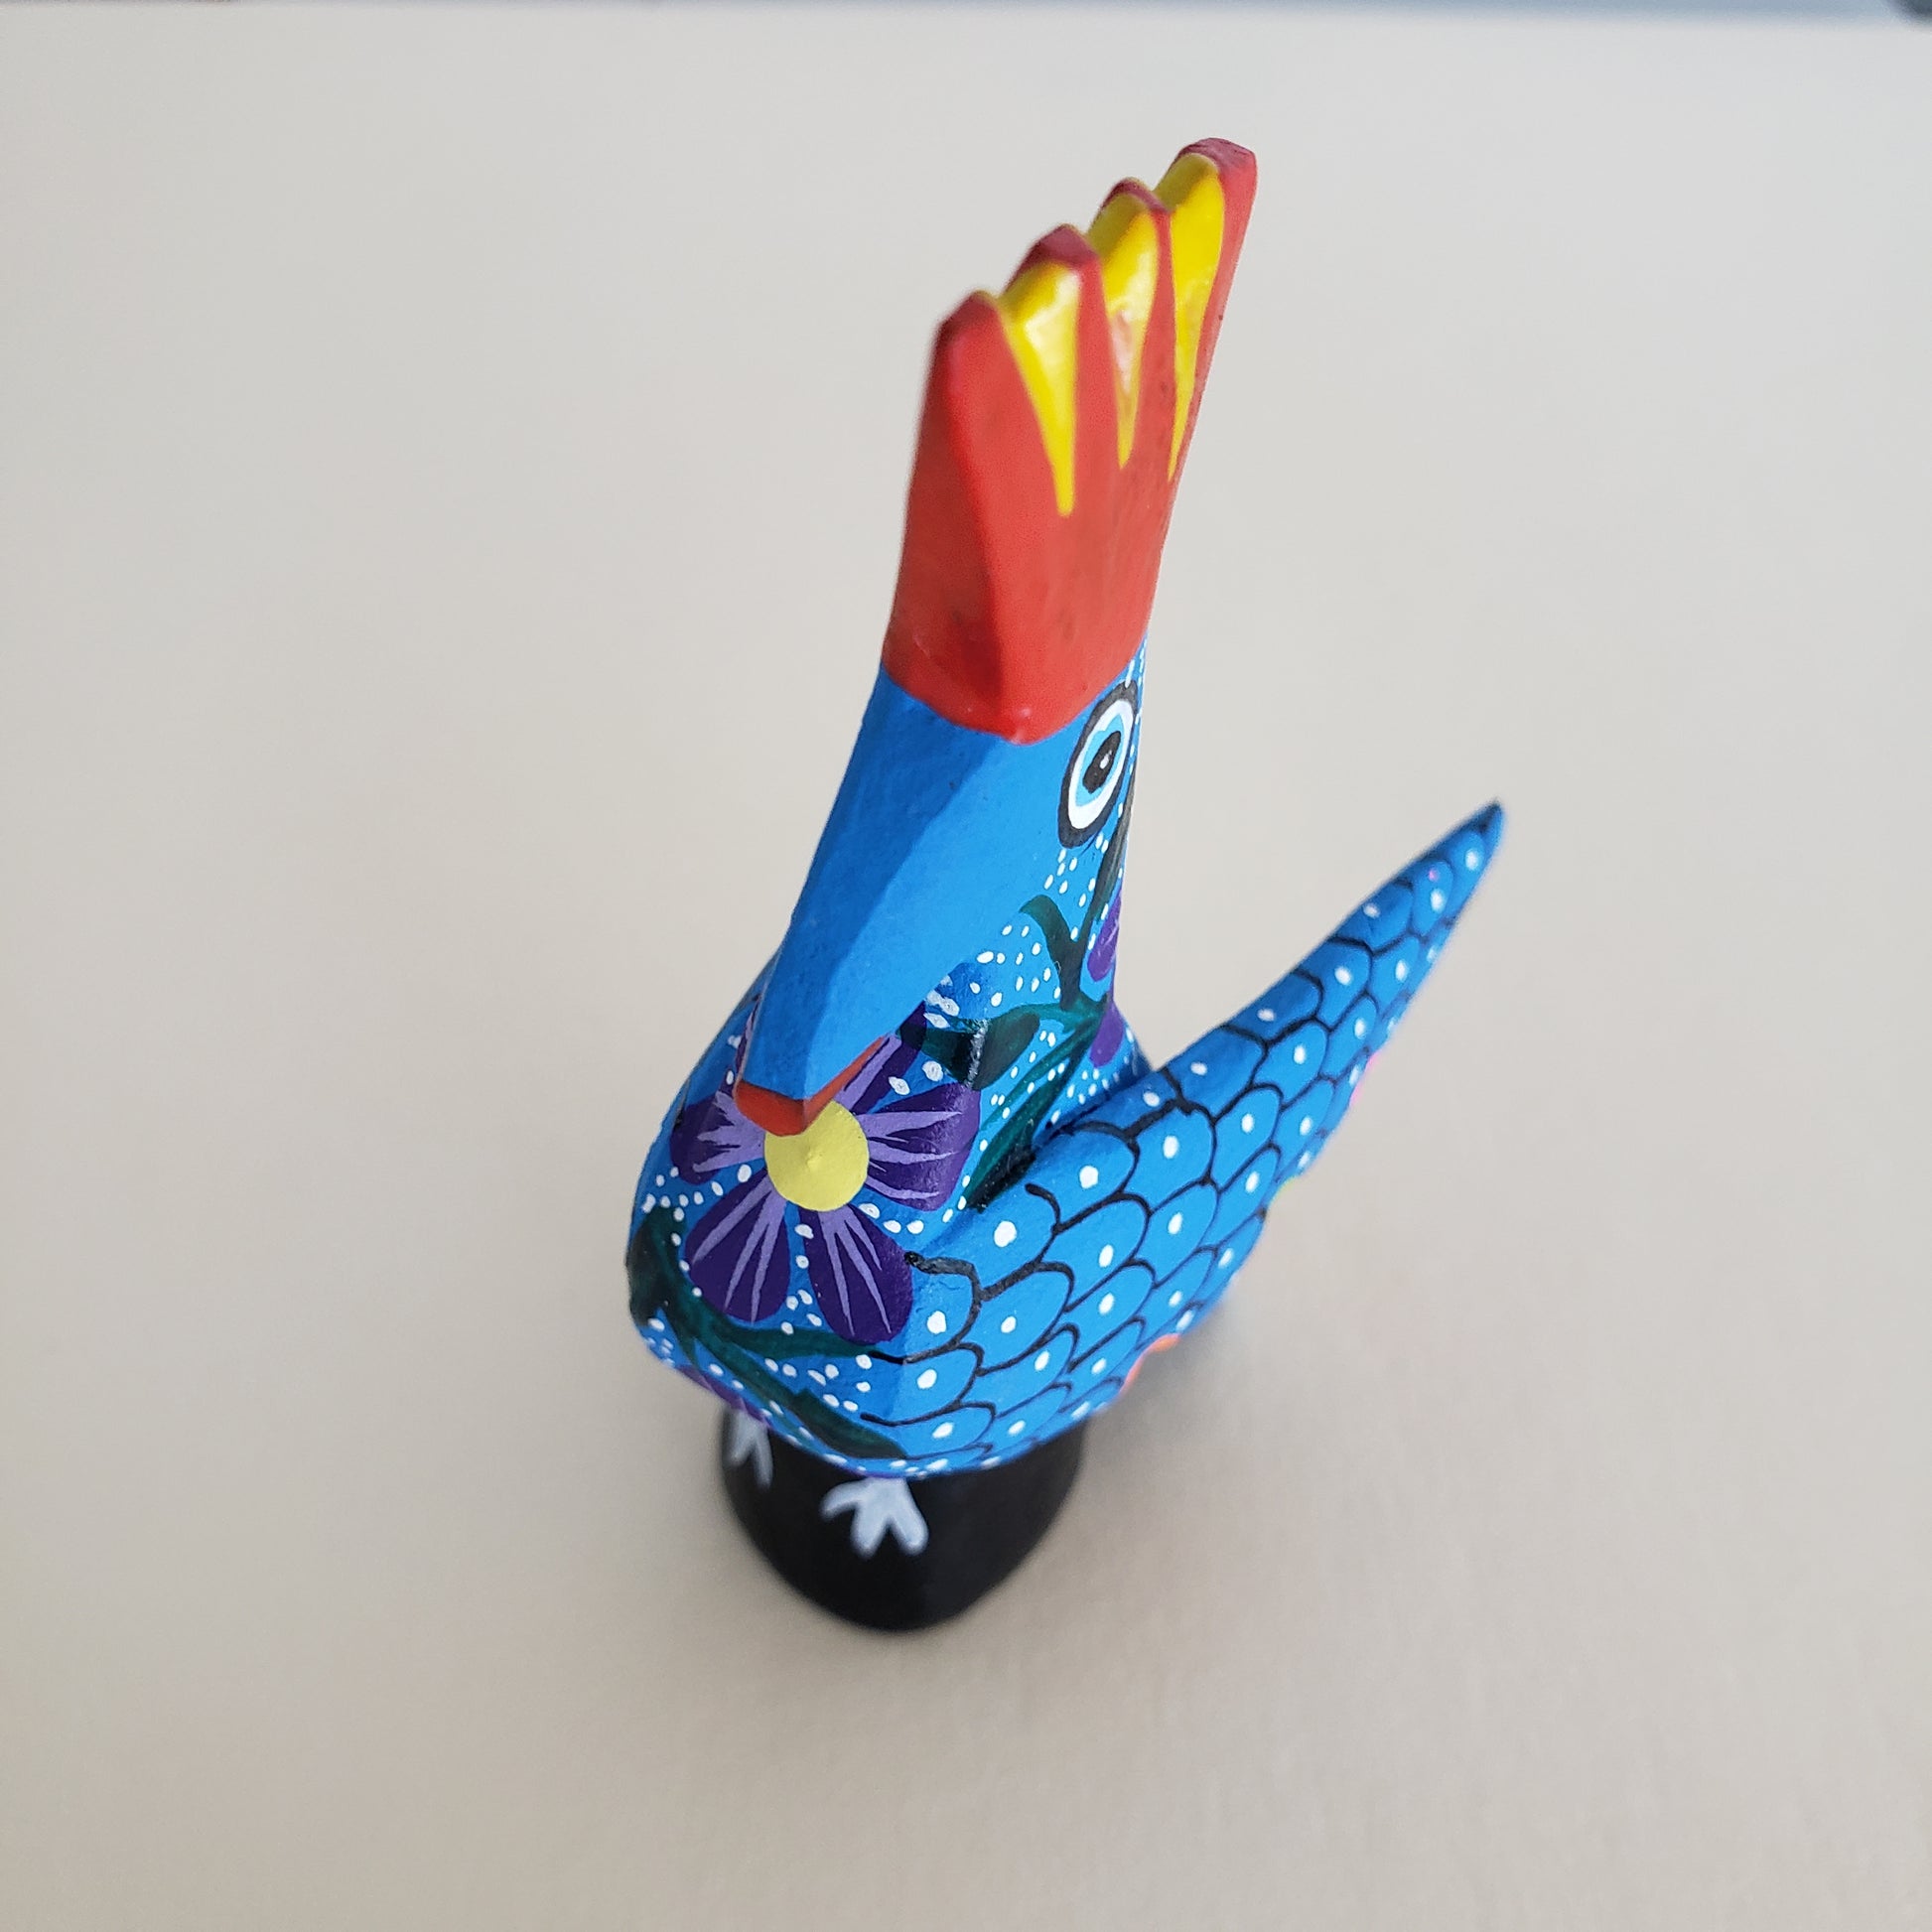 Rooster Mini Oaxacan Alebrije Wood Carving Mexican Hand Painted Chicken - The Little Pueblo